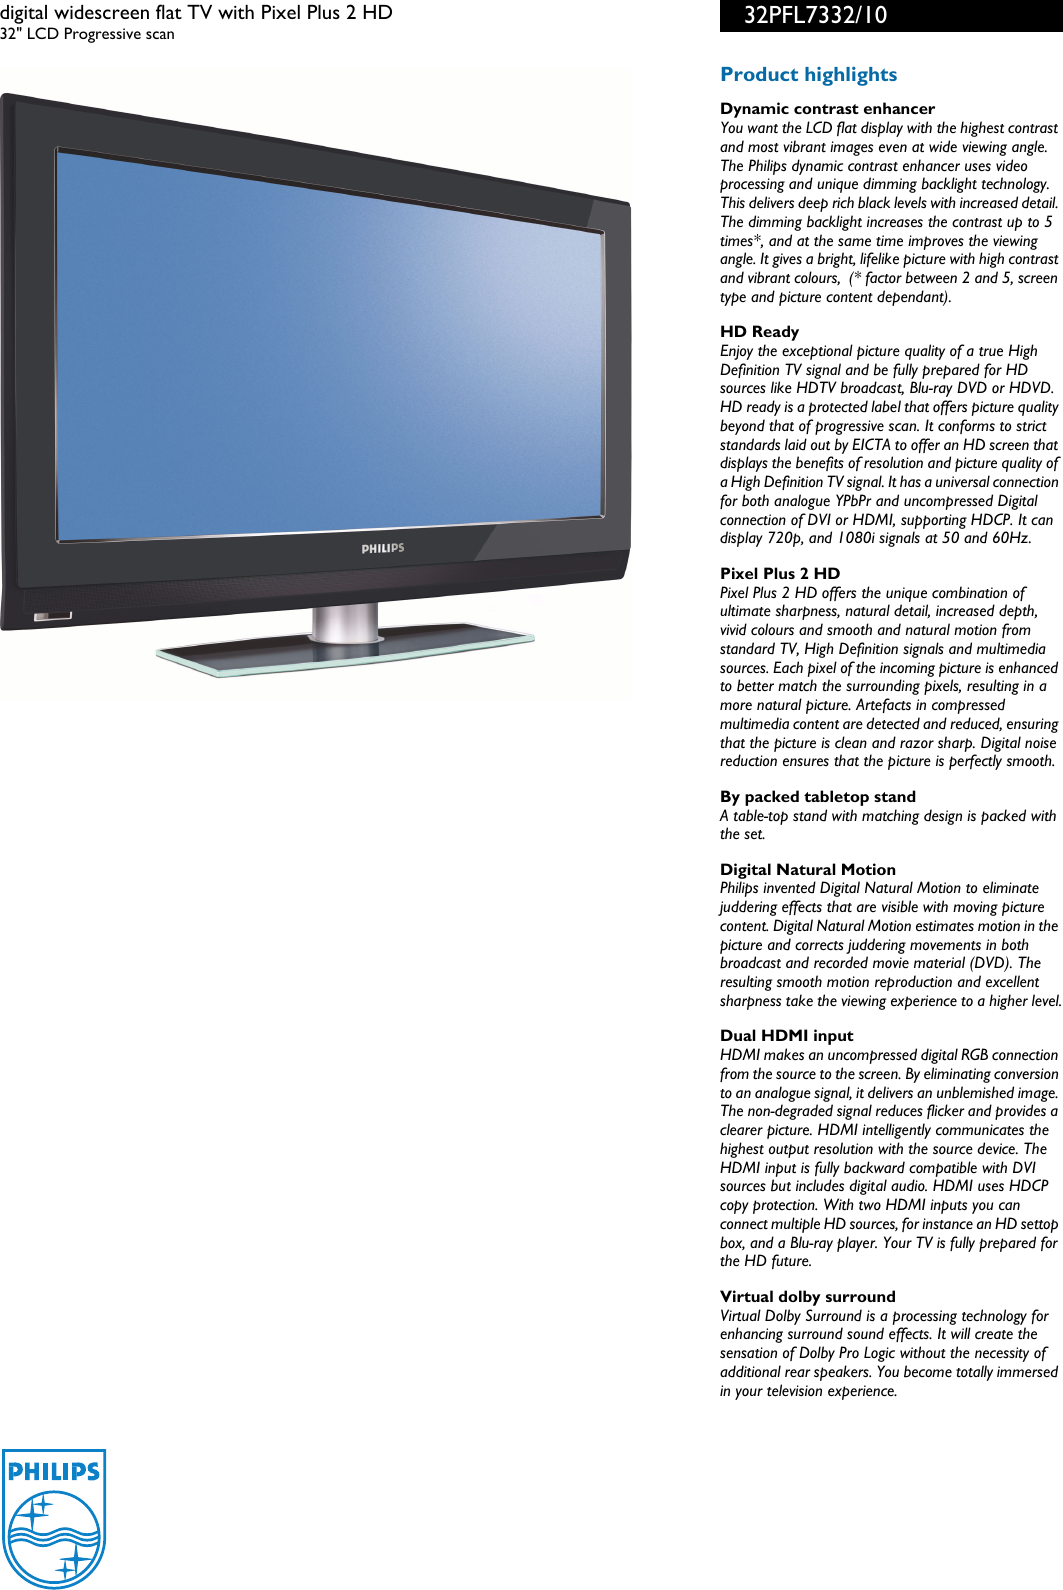 focus cage accident Philips 32Pfl7332 Users Manual 32PFL7332/10 Digital Widescreen Flat TV With  Pixel Plus 2 HD